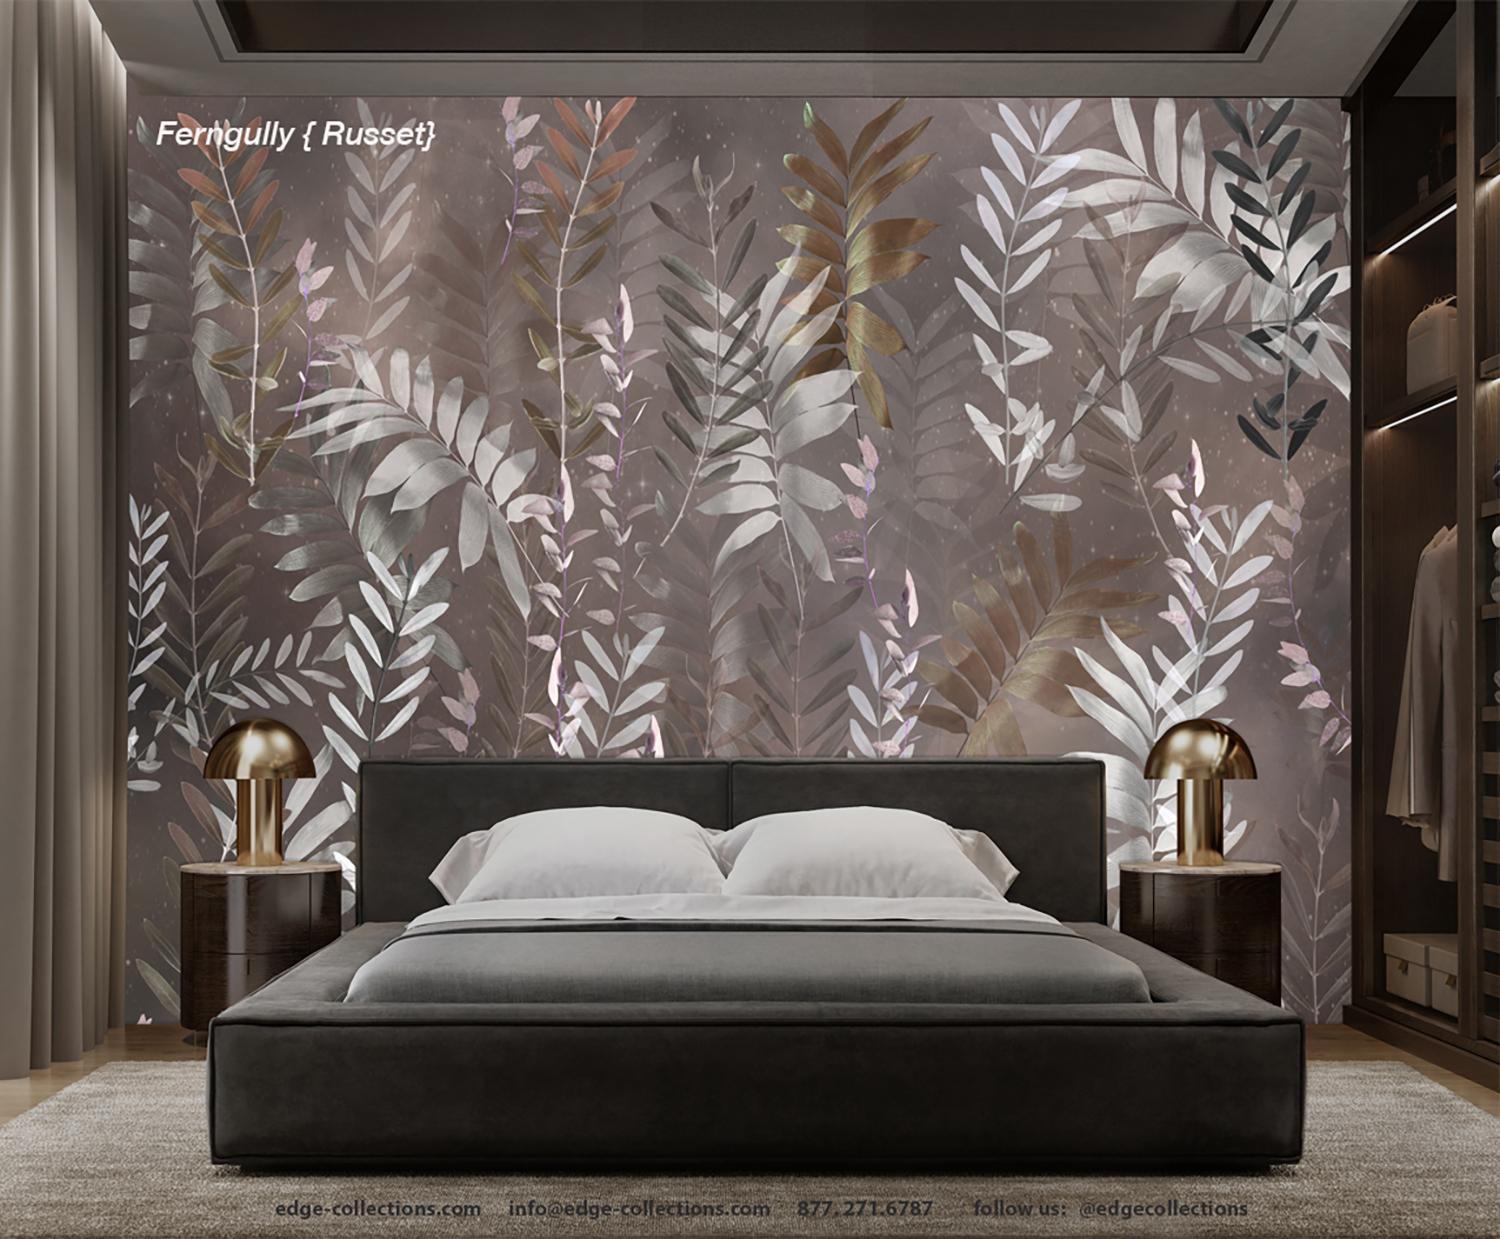 Ferngully Wallcovering by EDGE Collections.

As we move into unchartered territories with the world around us, we sought to create a collection with strong, positive symbolization. The Maori people believe Ferns represent new life and new